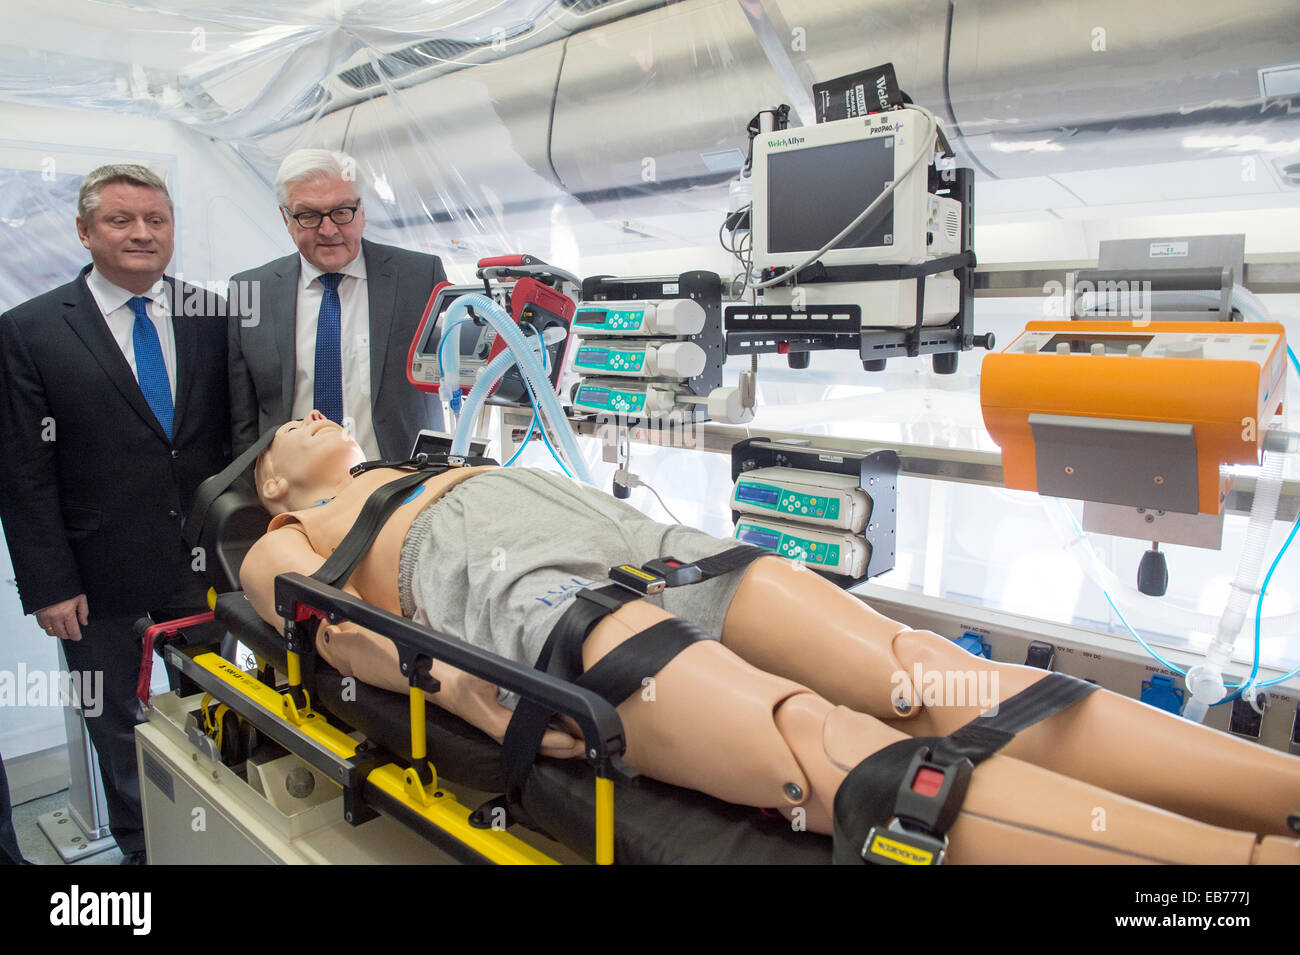 Berlin, Germany. 27th Nov, 2014. German Foreign Minister Frank-Walter Steinmeier (R) and Health Minister Hermann Groehe tour the 'Robert Koch' evacuation plane at Tegel Airport in Berlin, Germany, 27 November 2014. The Airbus A340 has an isolation unit for highly infectious patients with for example ebola. Photo: MAURIZIO GAMBARINI/dpa/Alamy Live News Stock Photo